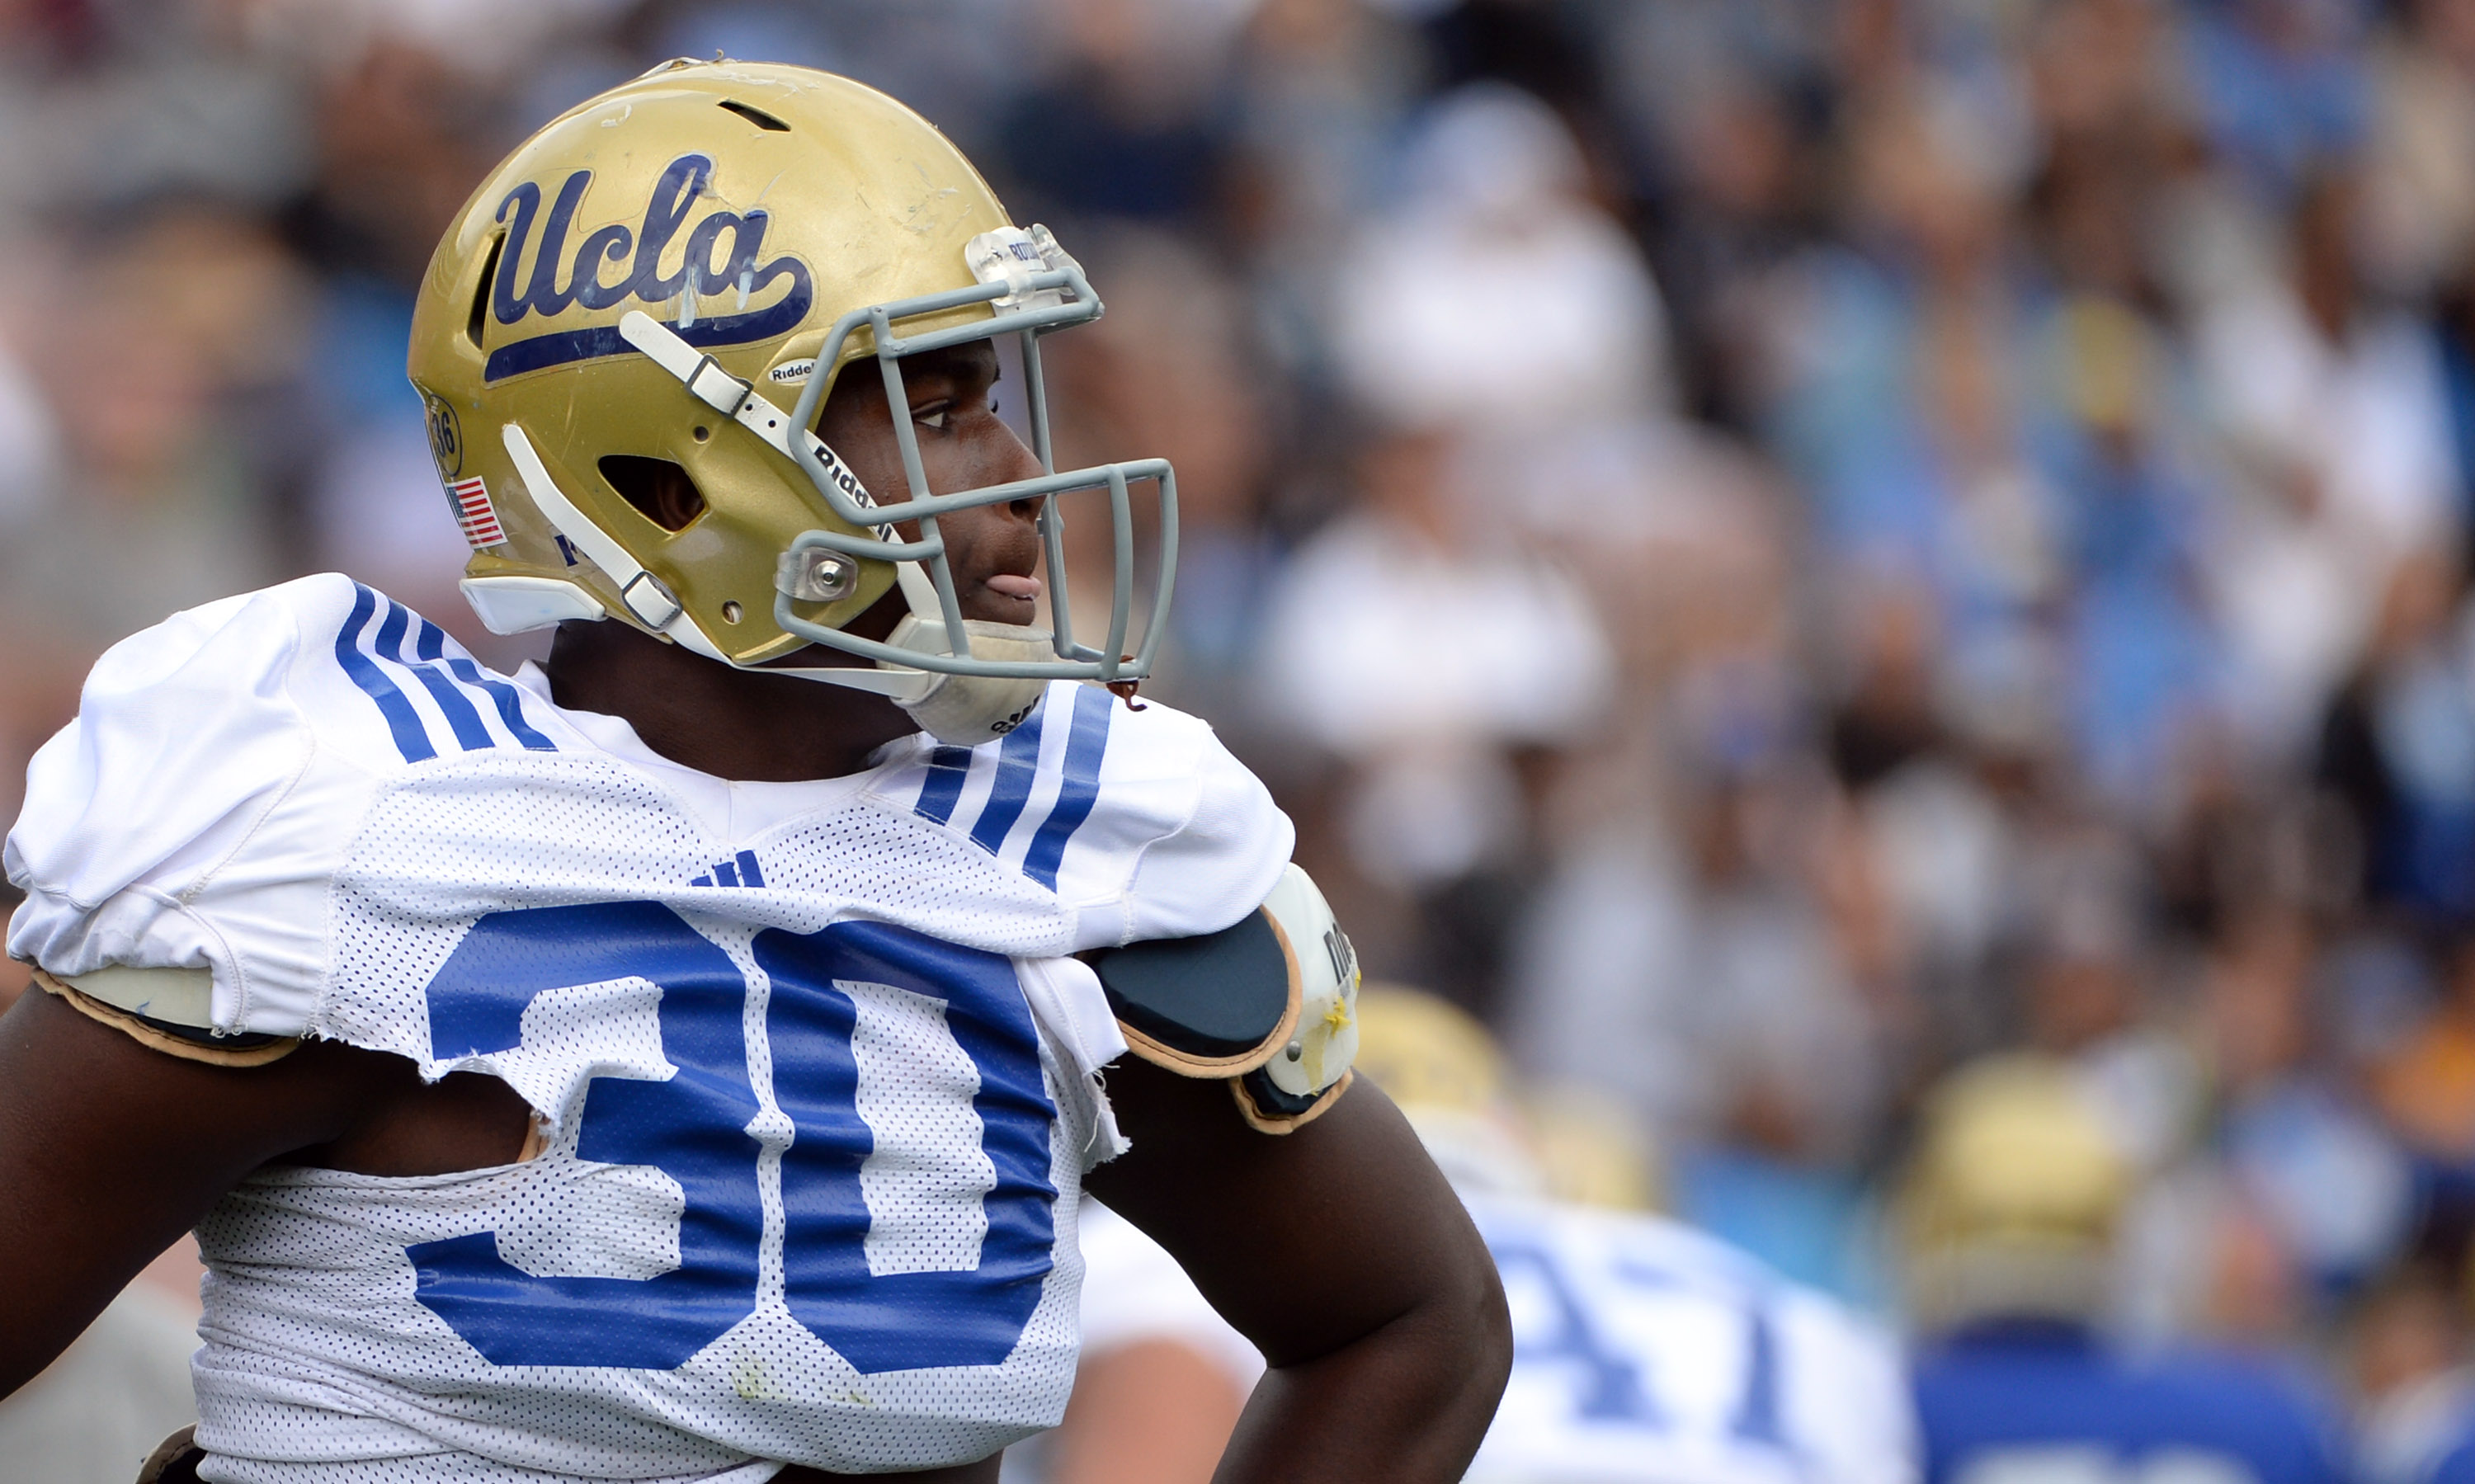 UCLA linebacker Myles Jack is out four to six months after undergoing surgery to repair an anterior meniscus tear. (Keith Birmingham/Staff)